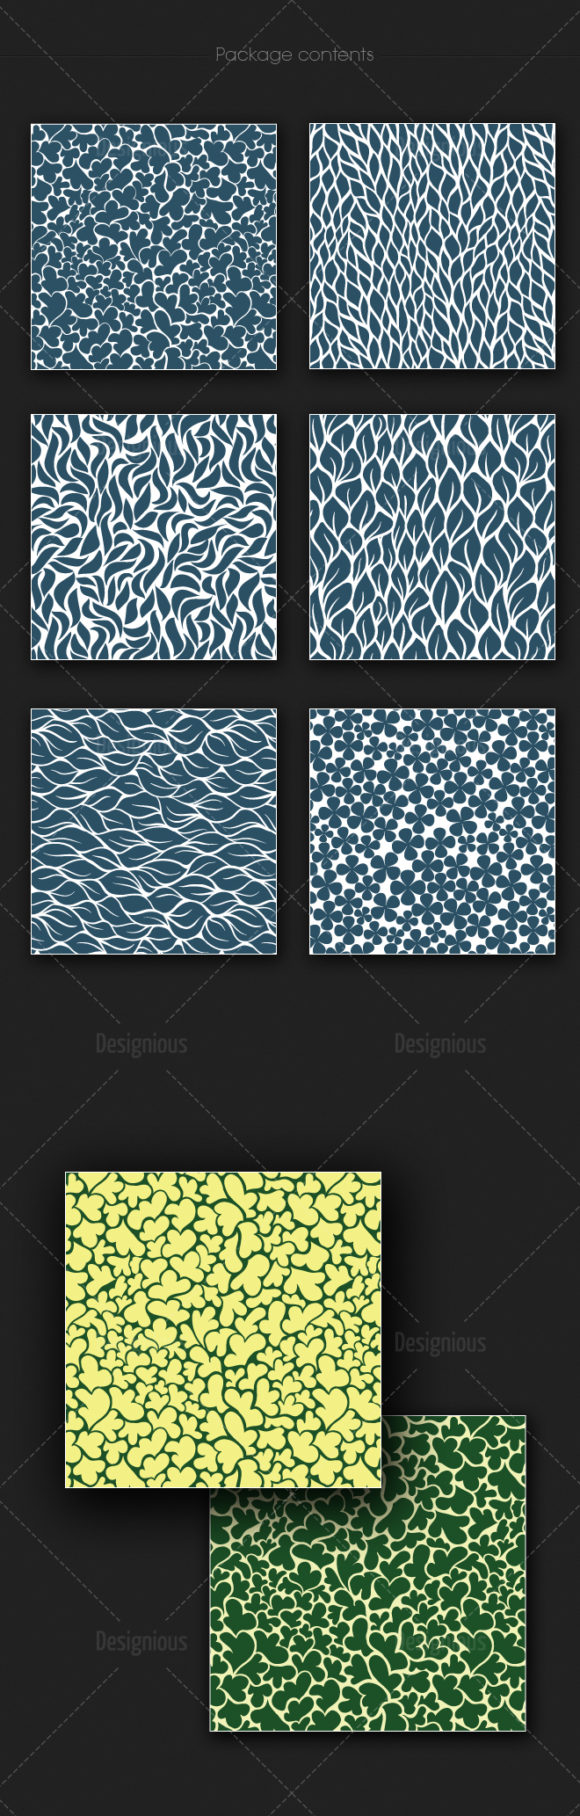 Seamless Patterns Vector Pack 171 2